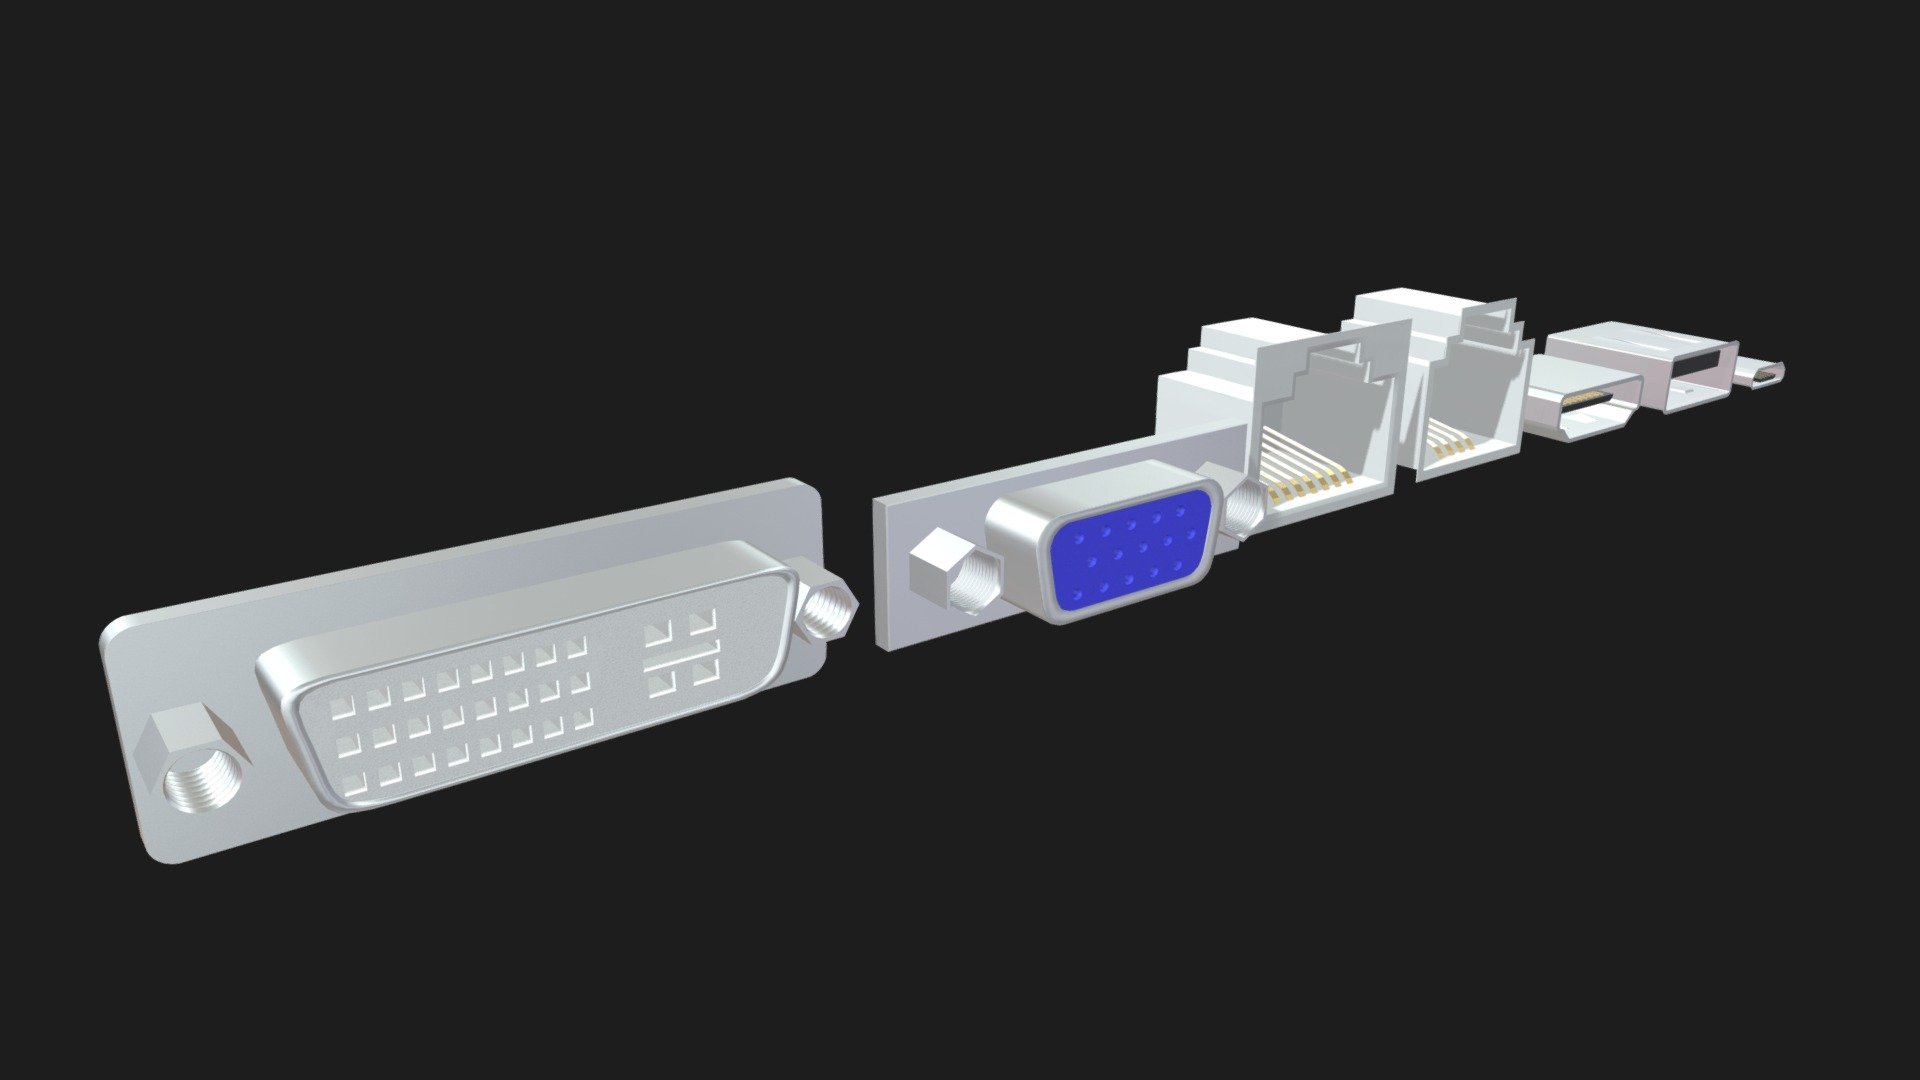 === The following description refers to the additional ZIP package provided with this model ===

Computer ports sockets 3D Model. 7 individual objects (dvi-i, vga, micro-usb, usb-a, hdmi, rj45 ethernet, rj11 phone), sharing the same non overlapping UV Layout map, Material and PBR Textures set. Production-ready 3D Model, with PBR materials, textures, non overlapping UV Layout map provided in the package.

Quads only geometries (no tris/ngons).

Formats included: FBX, OBJ; scenes: BLEND (with Cycles / Eevee materials); other: png with Alpha.

7 Objects (meshes), 1 PBR Material, UV unwrapped (non overlapping UV Layout map provided in the package); UV-mapped Textures.

UV Layout maps and Image Textures resolutions: 2048x2048; PBR Textures made with Substance Painter.

Polygonal, QUADS ONLY (no tris/ngons); 24394 vertices, 24009 quad faces (48018 tris).

Real world dimensions; scene scale units: cm in Blender (that is: Metric with 0.01 scale).

Uniform scale object (scale applied in Blender) 3d model